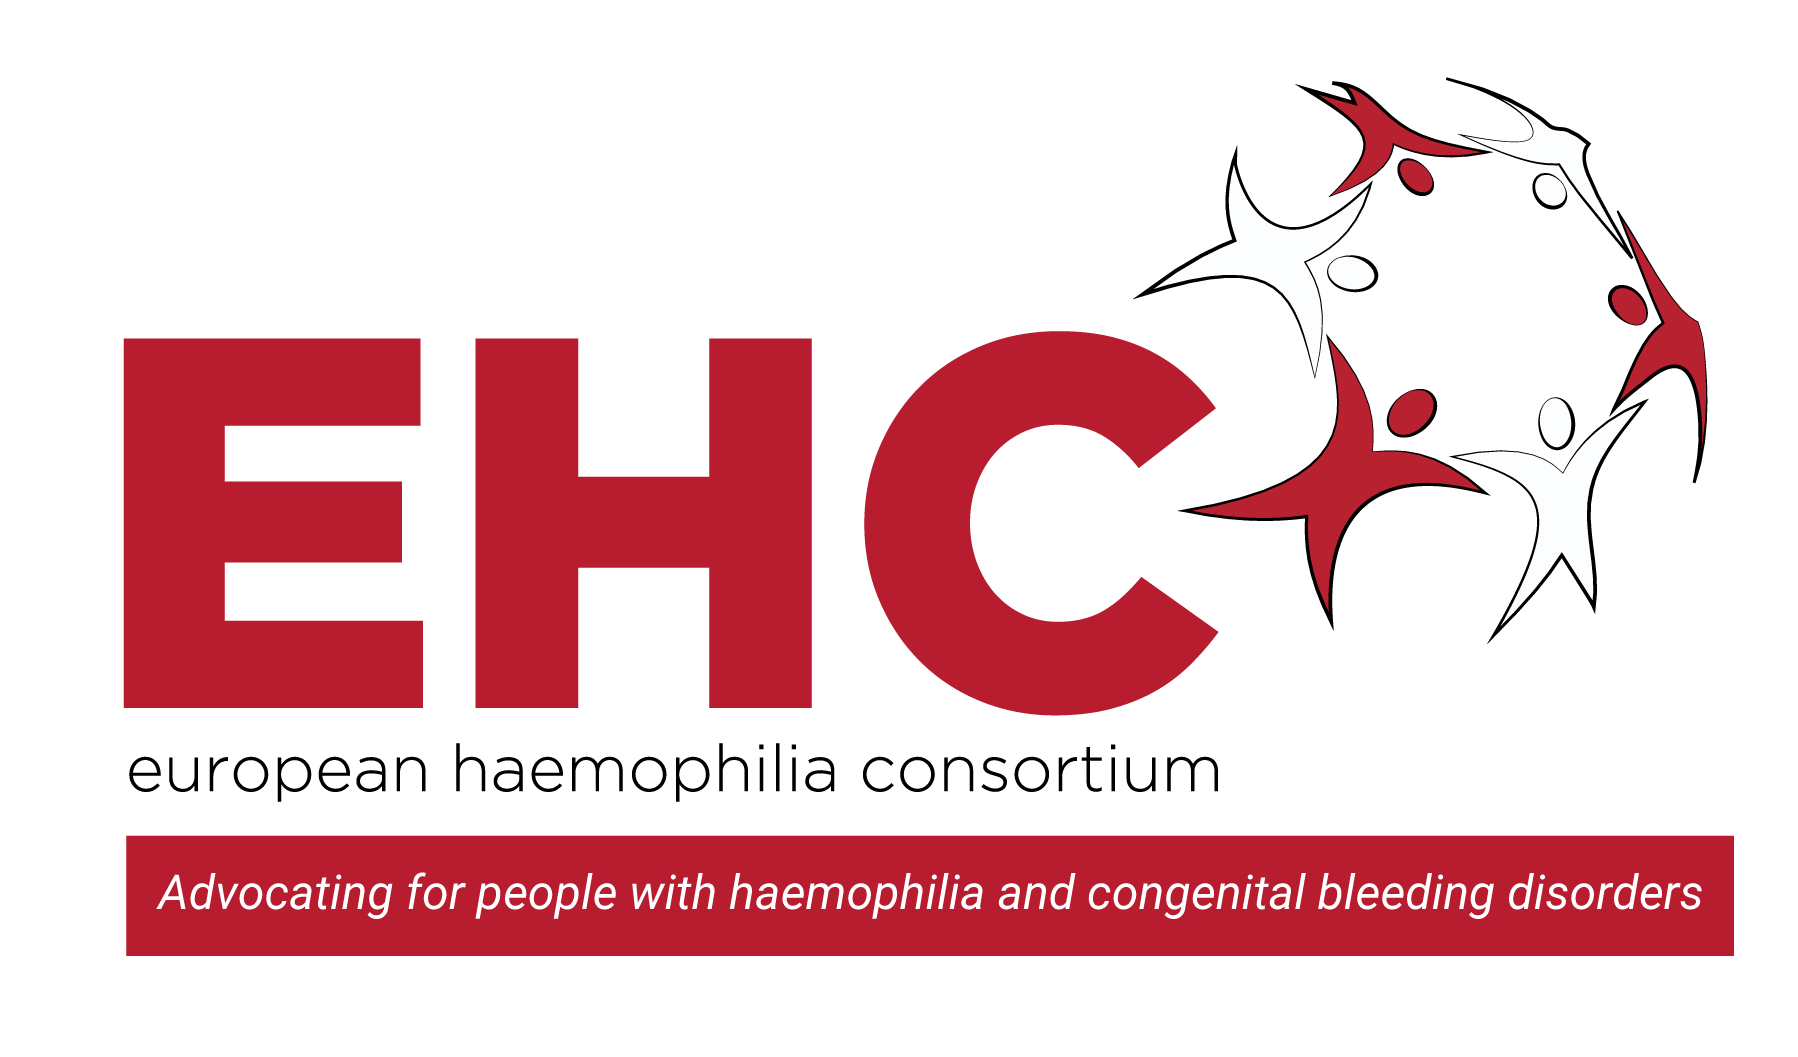 EHC – European Haemophilia Consortium - Advocating for people with haemophilia and congenital bleeding disorders - /prac-conclusion-for-the-art-31-referral-on-fviii-products/